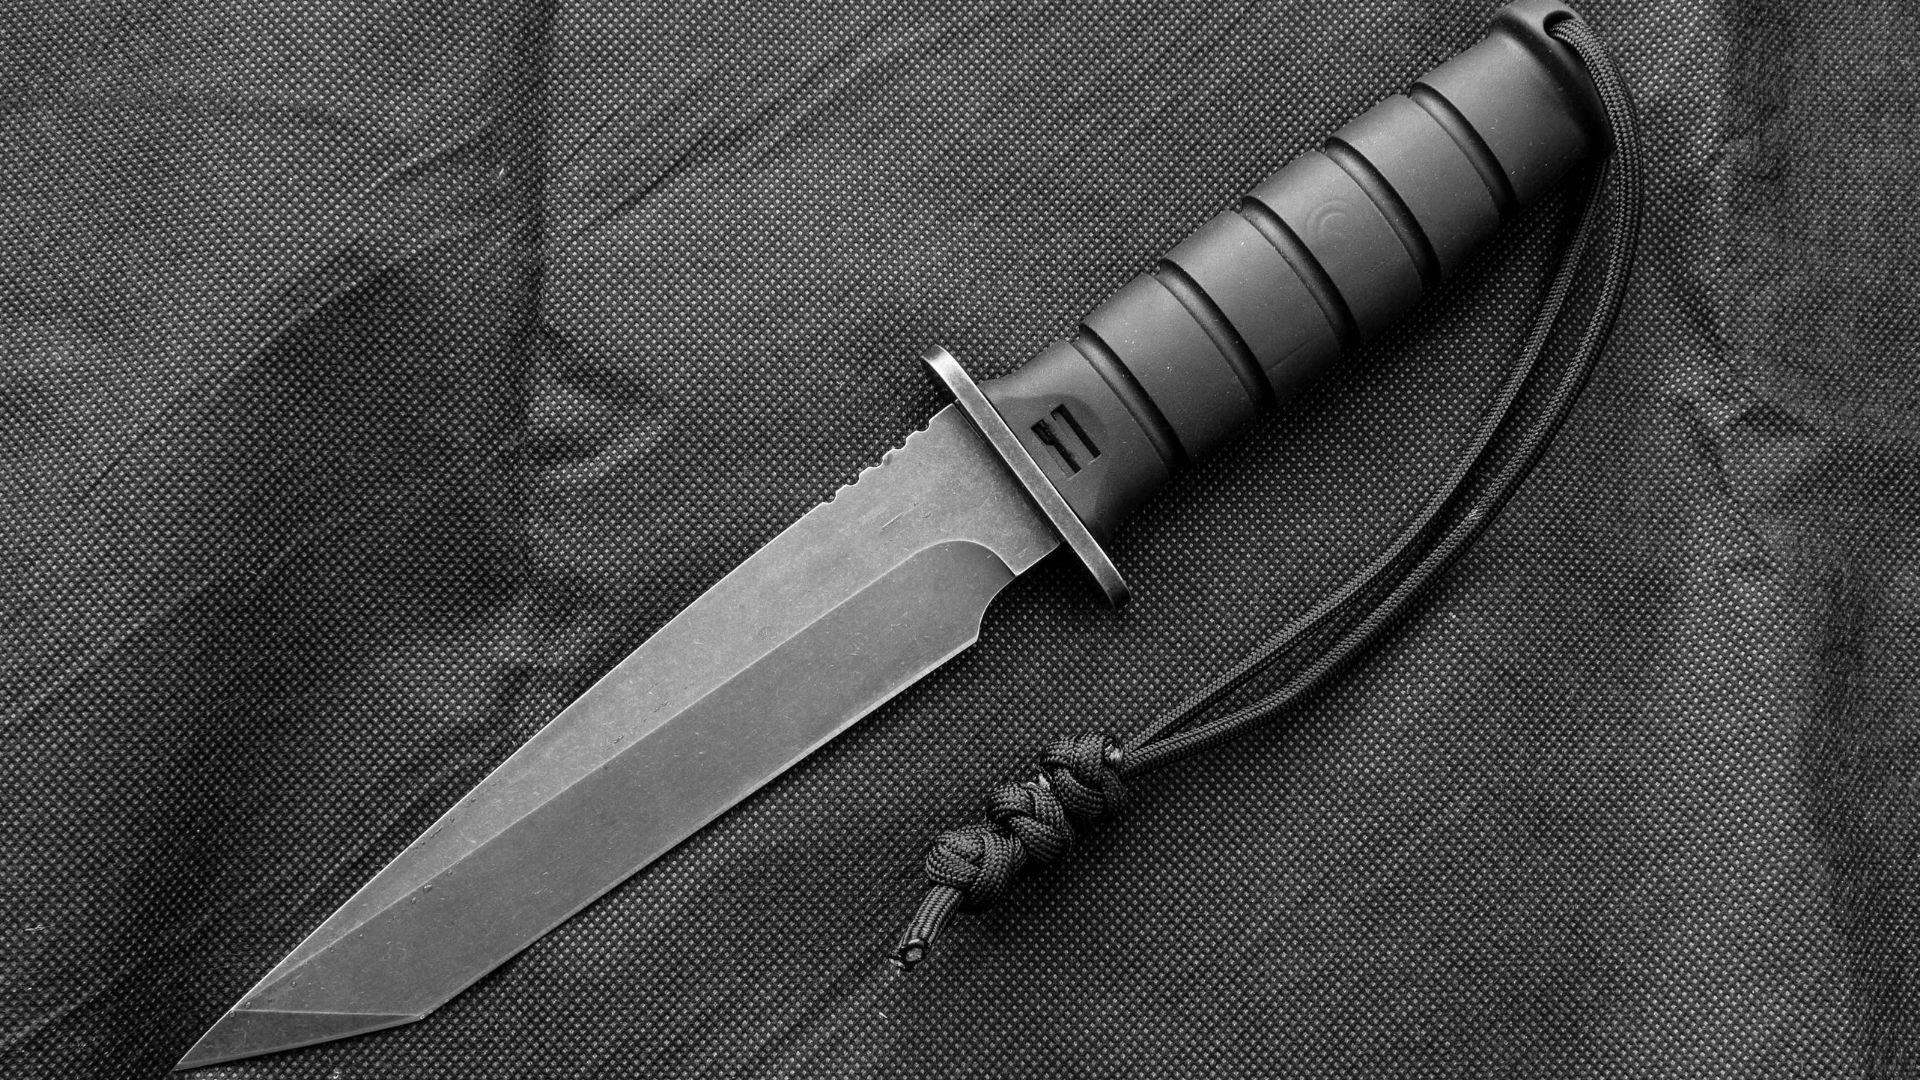 Important Features To Consider Before Buying a Tactical Knife